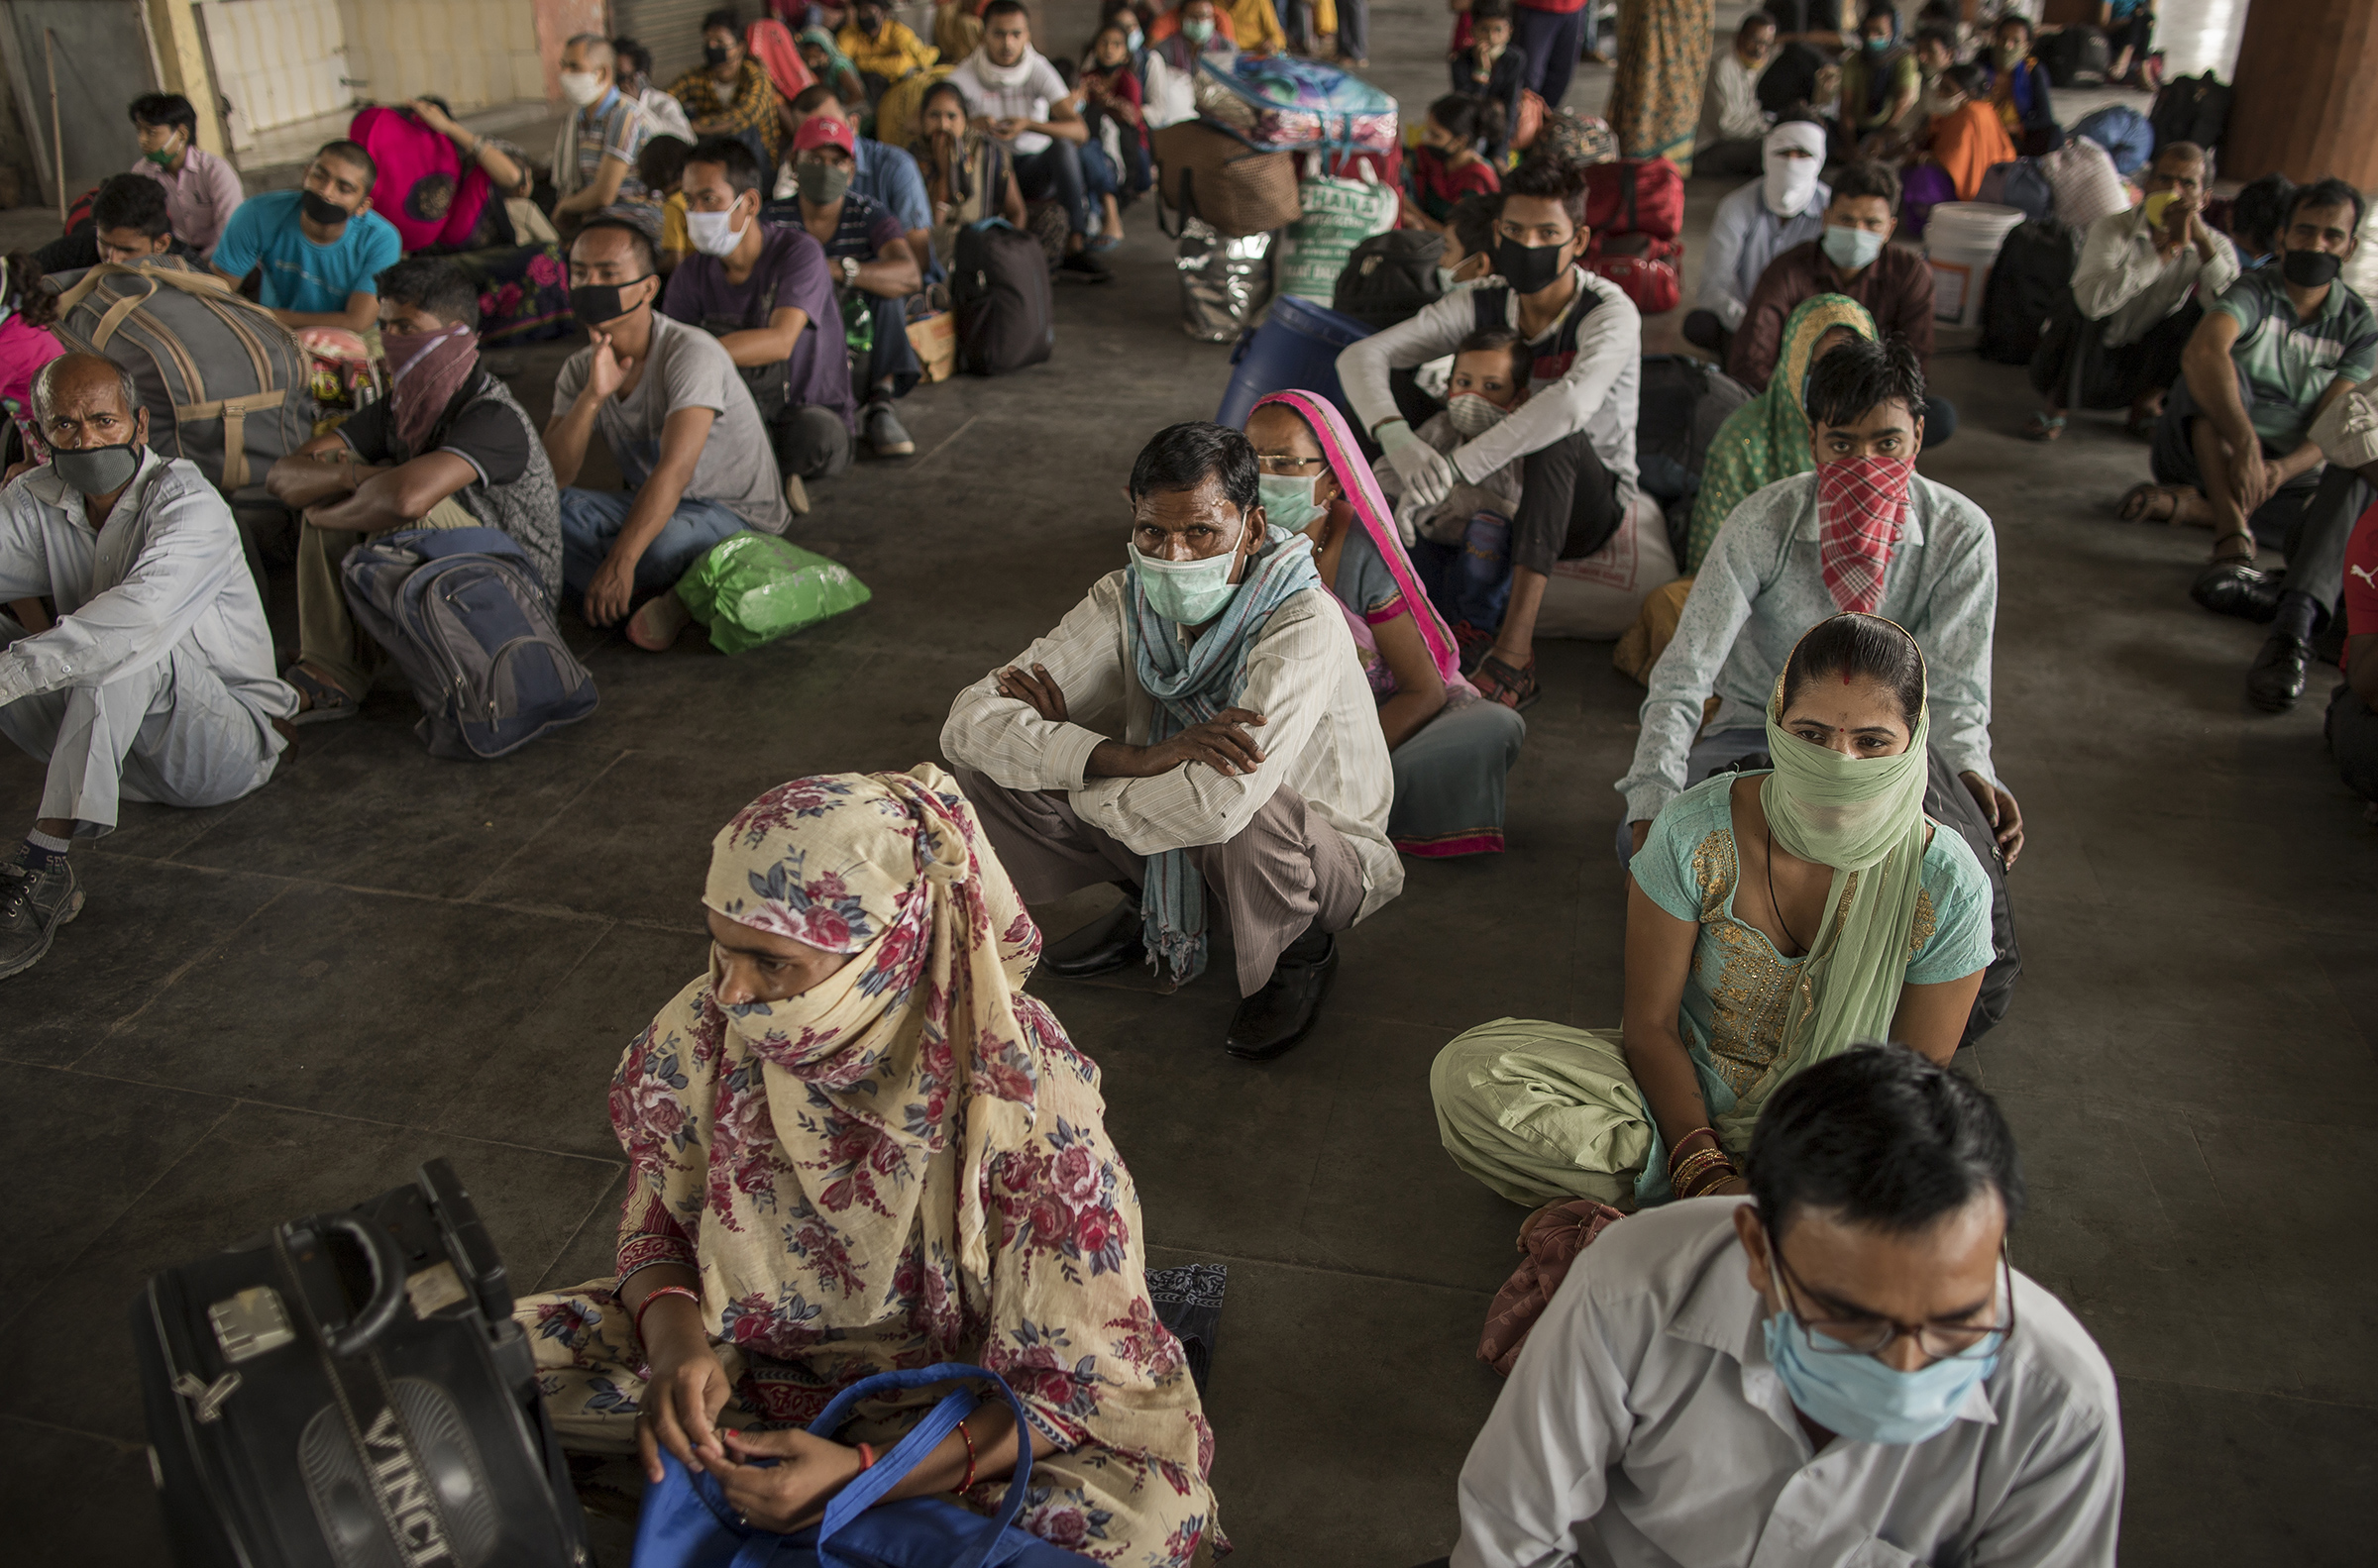 Migrant workers sit at a bus terminal as they wait to catch state-provided transportation to their home villages, in Greater Noida, Uttar Pradesh, on May 29, 2020. Migrant workers, who form part of India's vast informal sector, were the worst hit by the shutdown. Millions lost jobs and incomes.